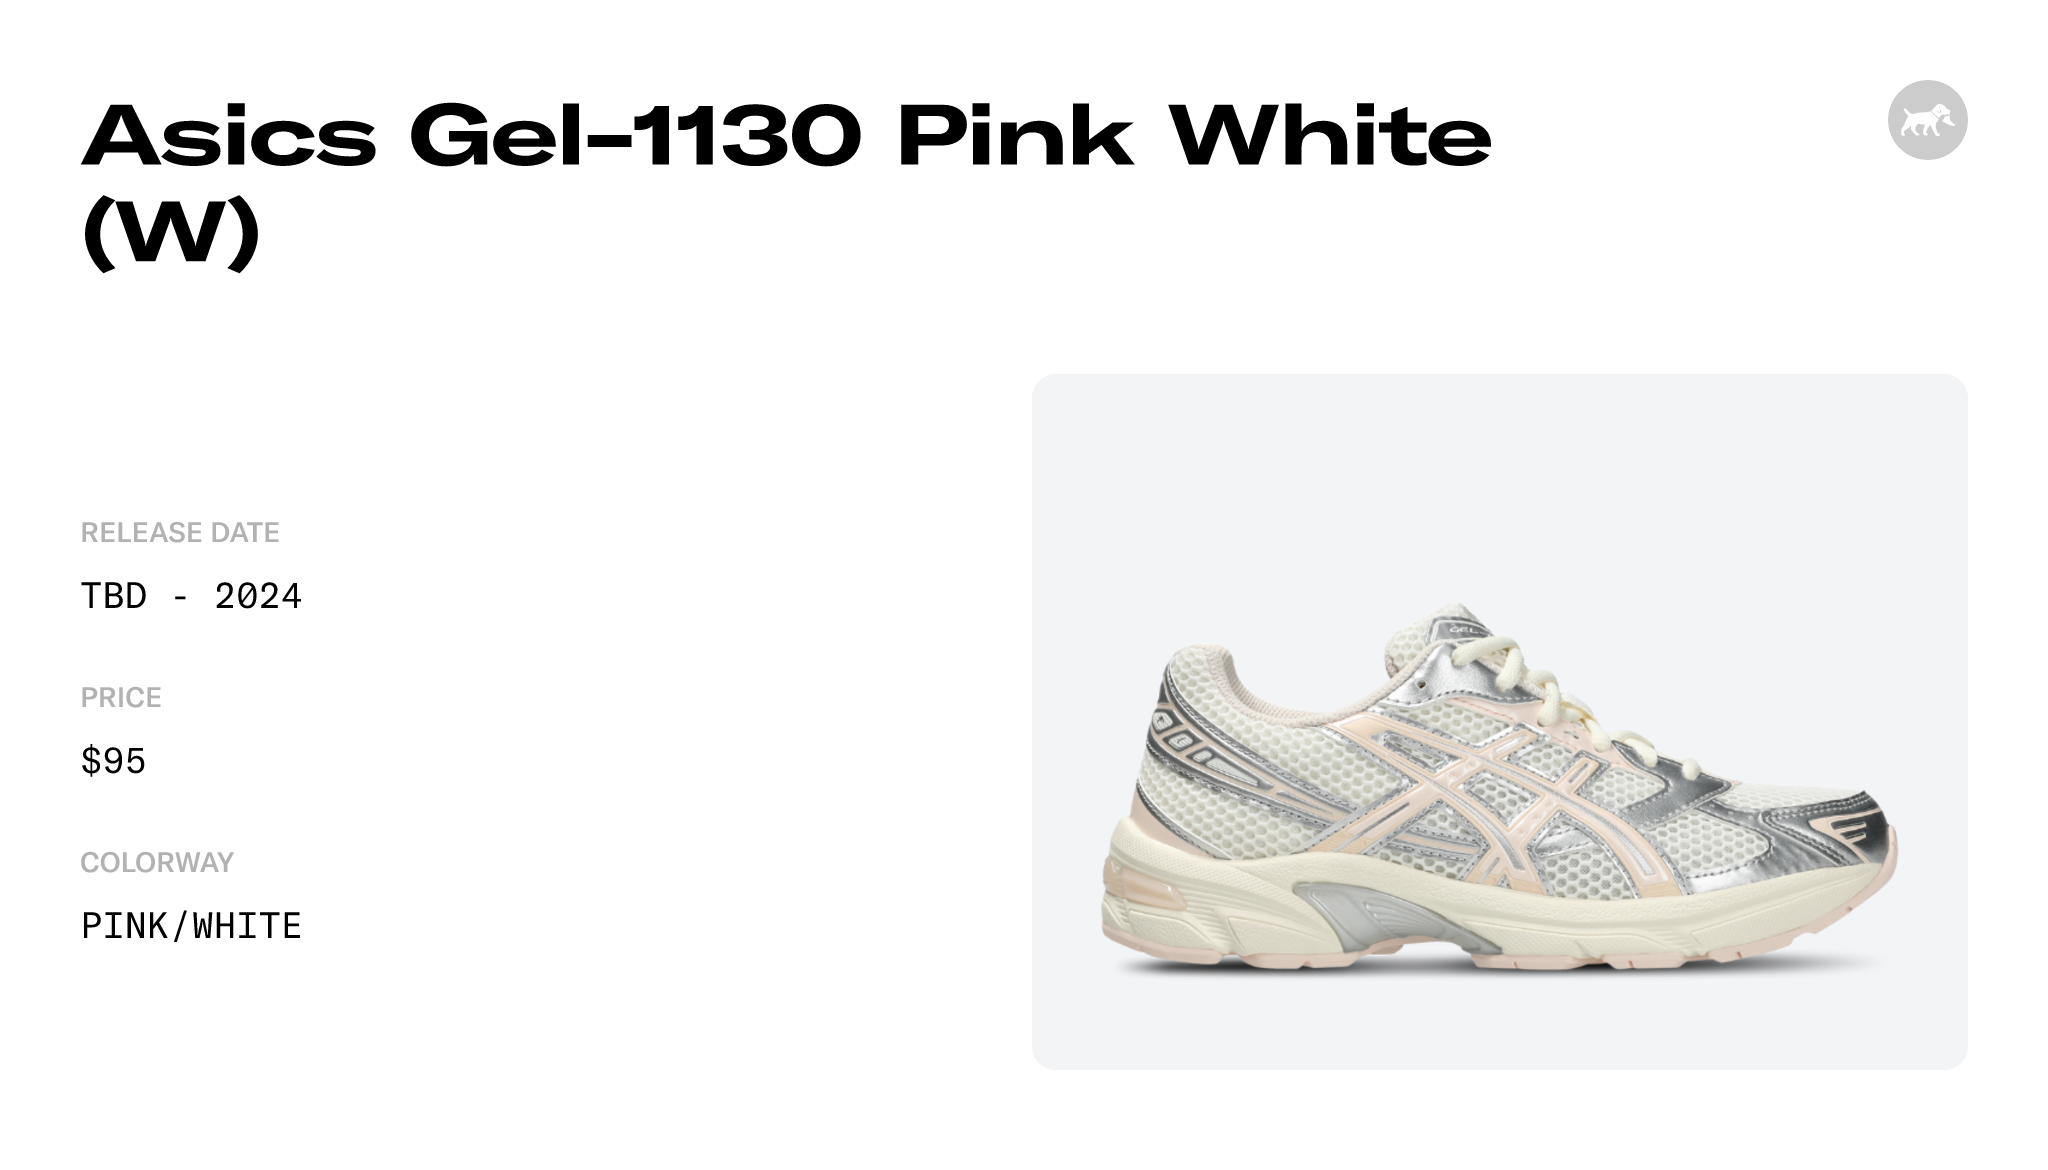 Asics Gel-1130 Pink White (W) Raffles and Release Date